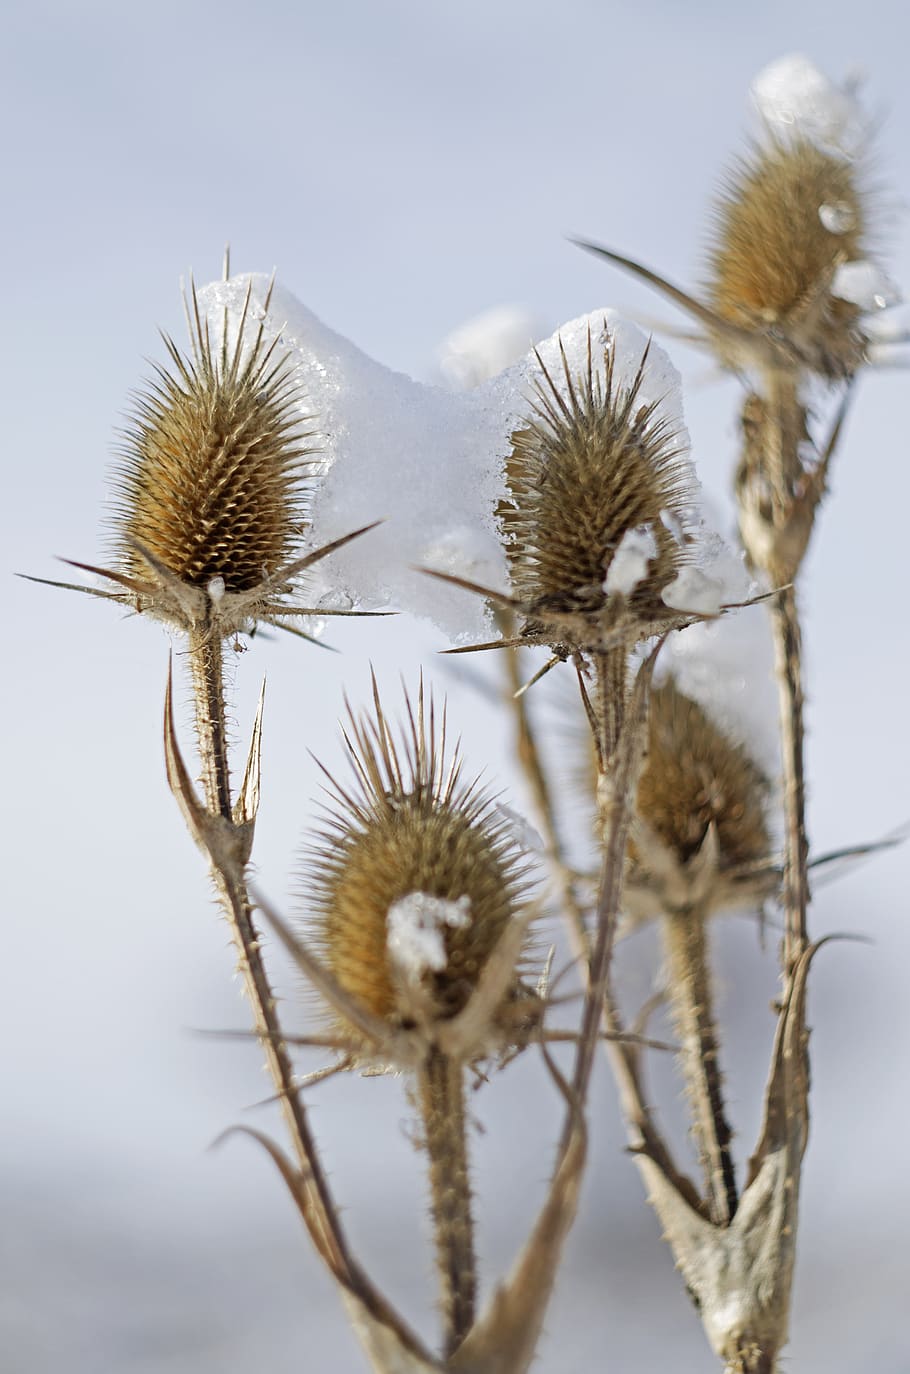 thistles, snow, winter, cold, blue, ice, sharp, thorns, crystals, nature